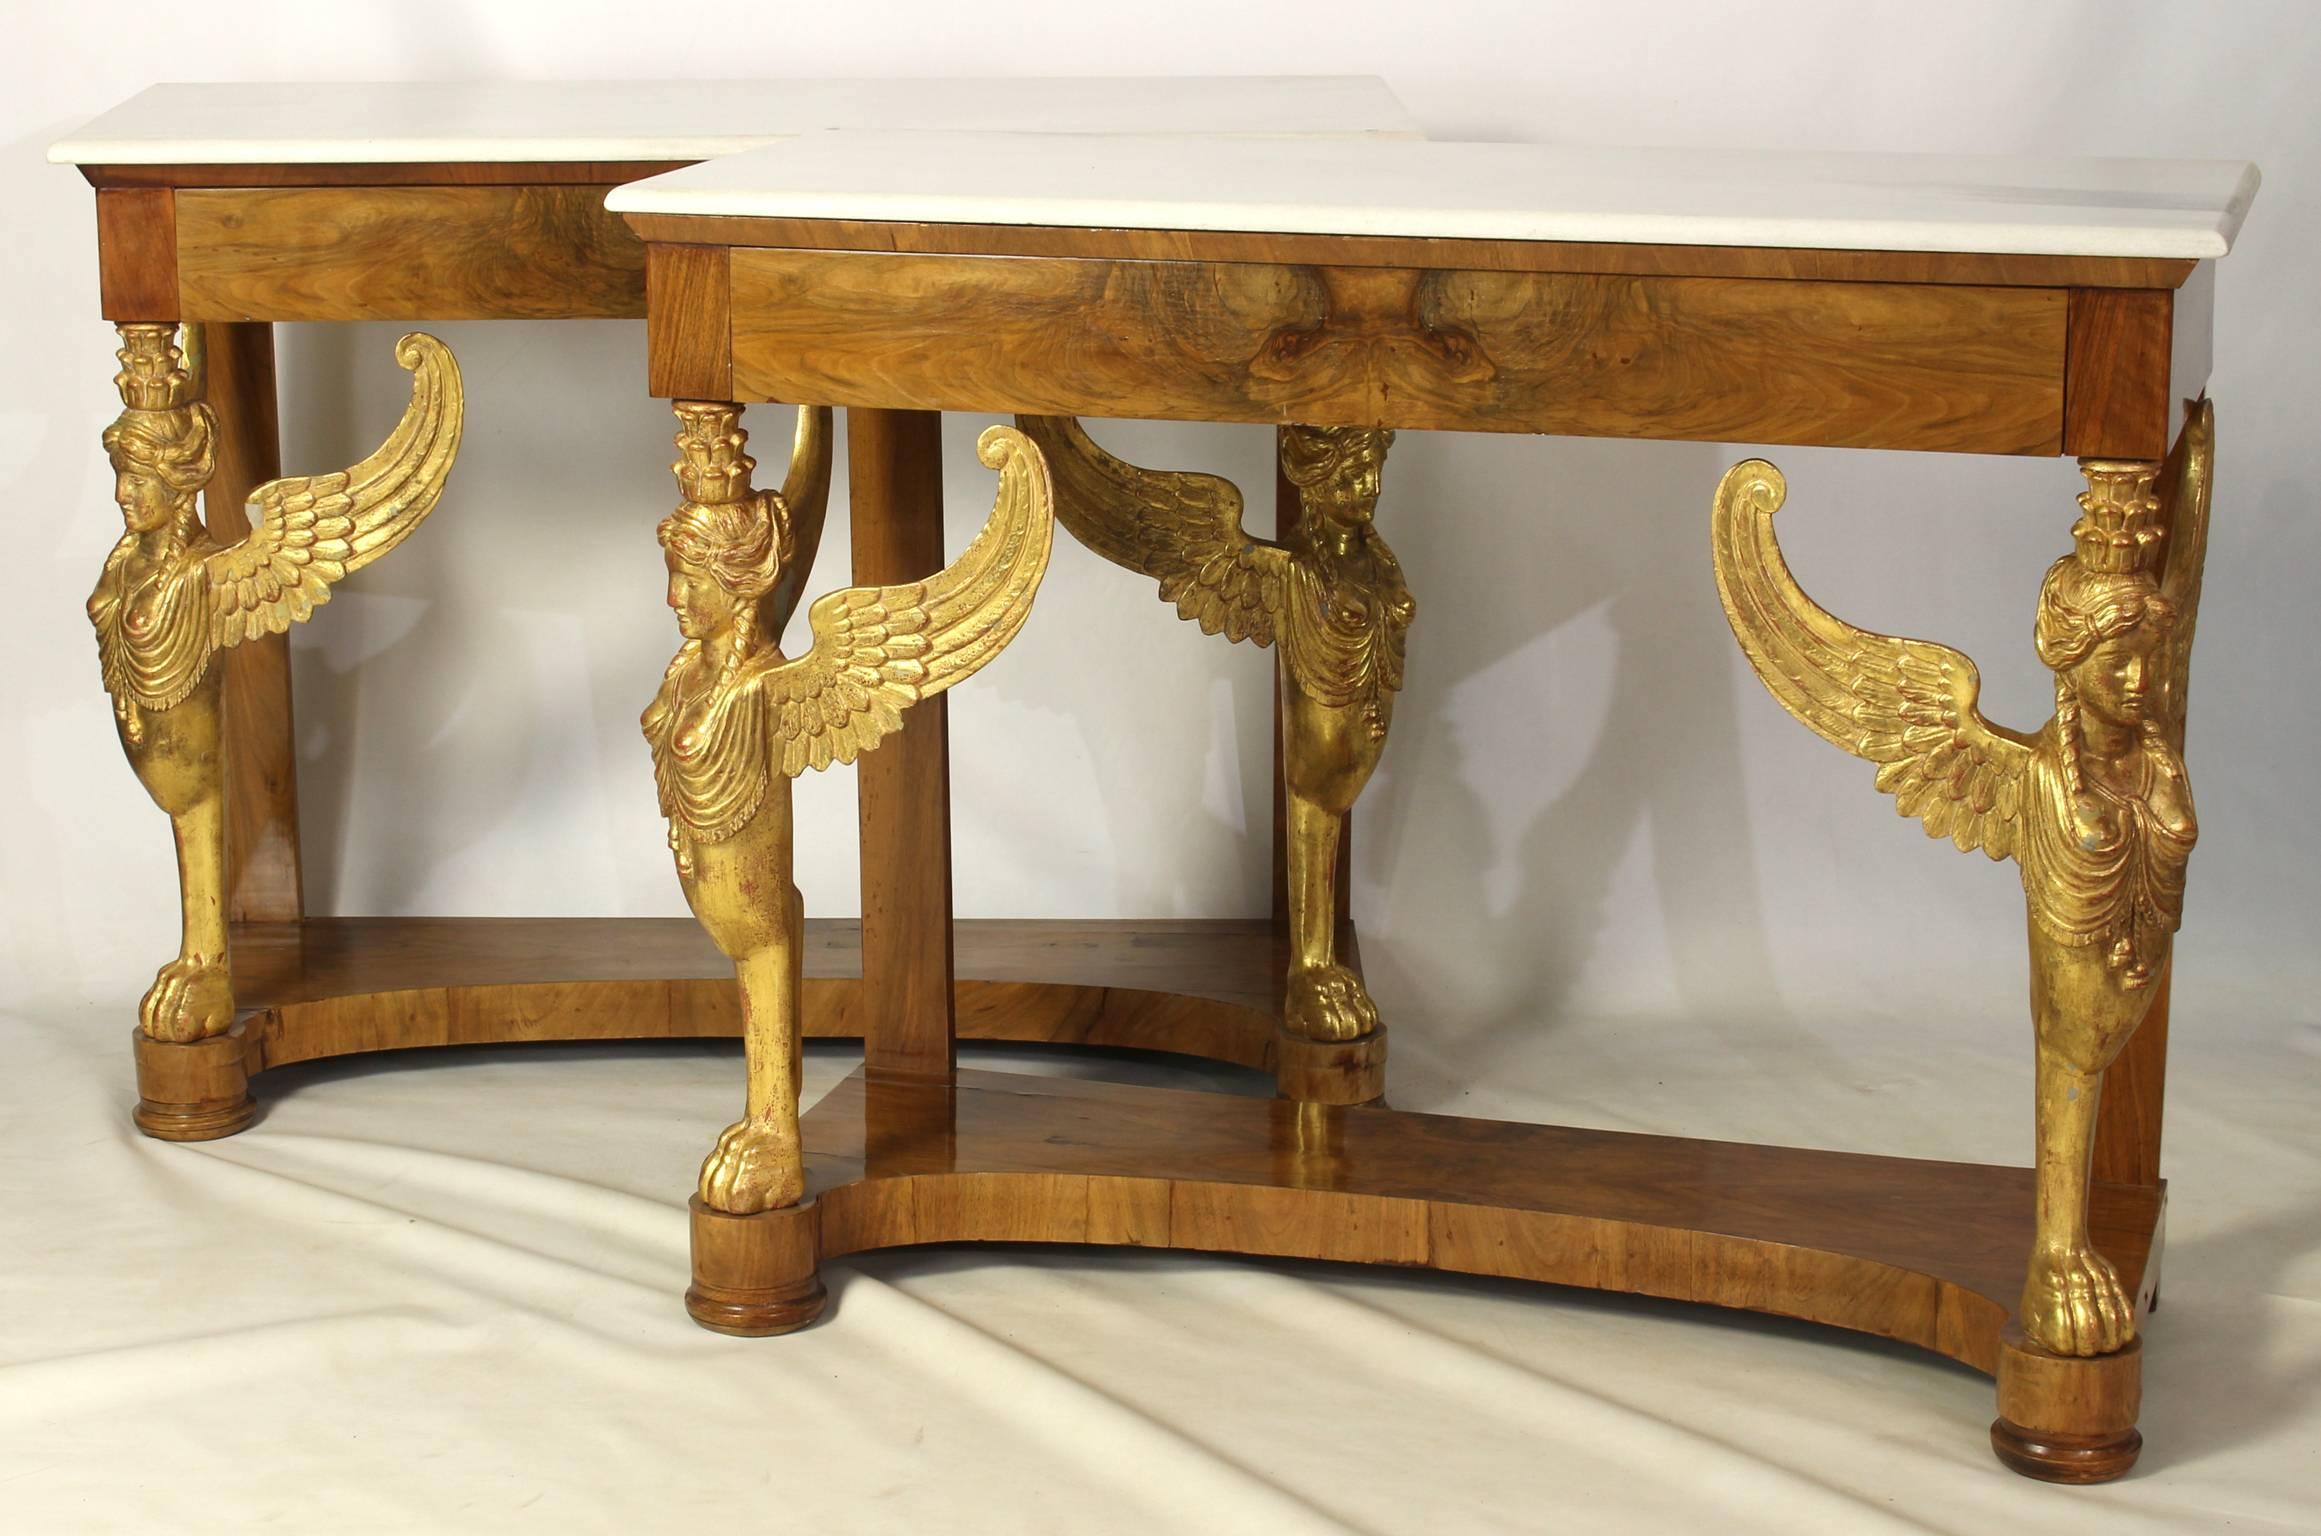 An elegant pair of late 19th century Italian neoclassical walnut and parcel gilt console tables with white marble tops supported by intricately carved winged female griffins.